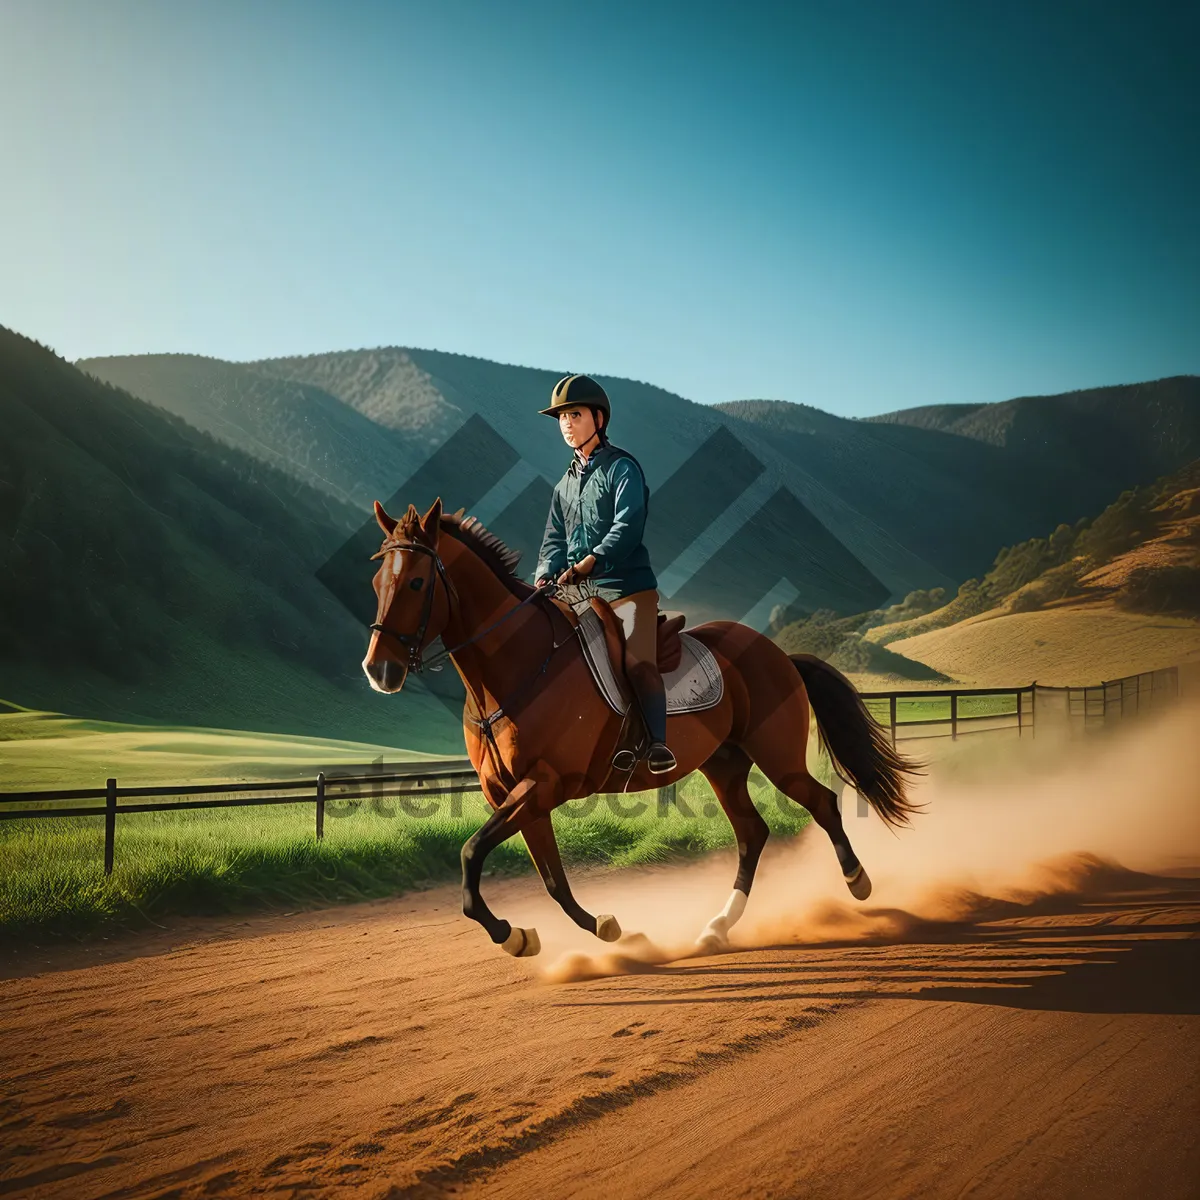 Picture of Dune Cowboy Riding Horse in Desert Landscape